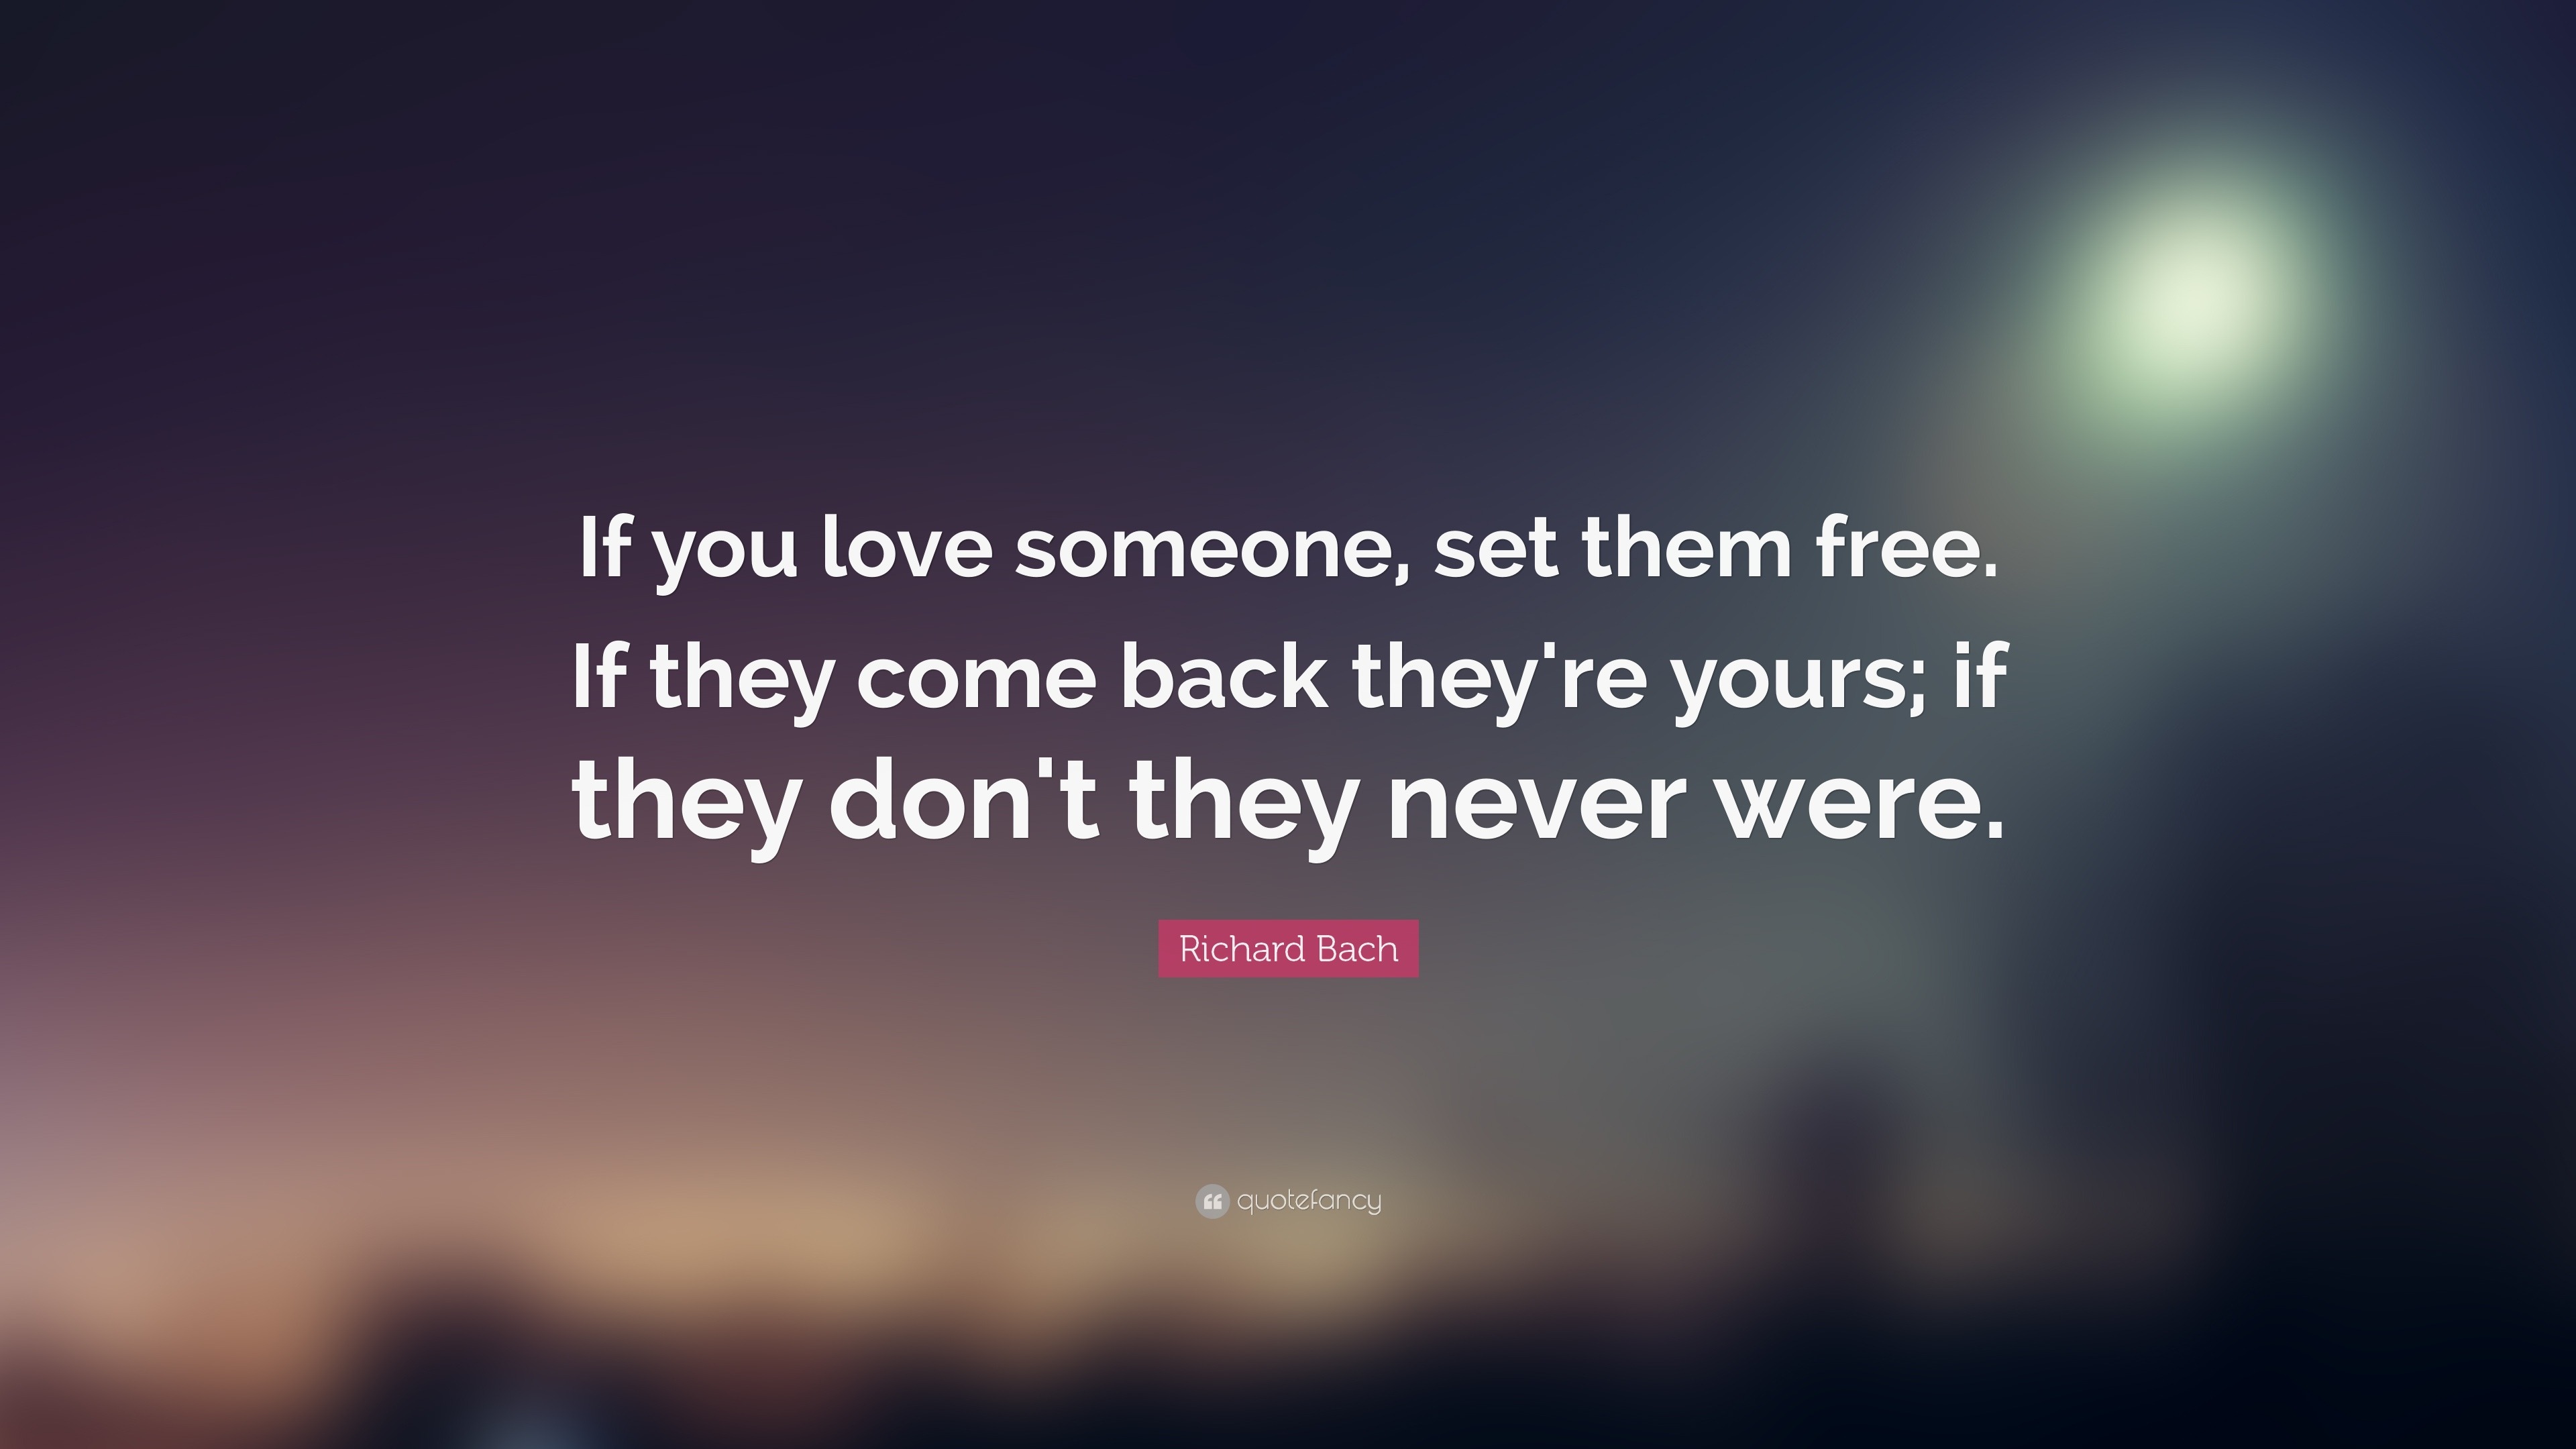 Richard Bach Quote “If you love someone set them free If they